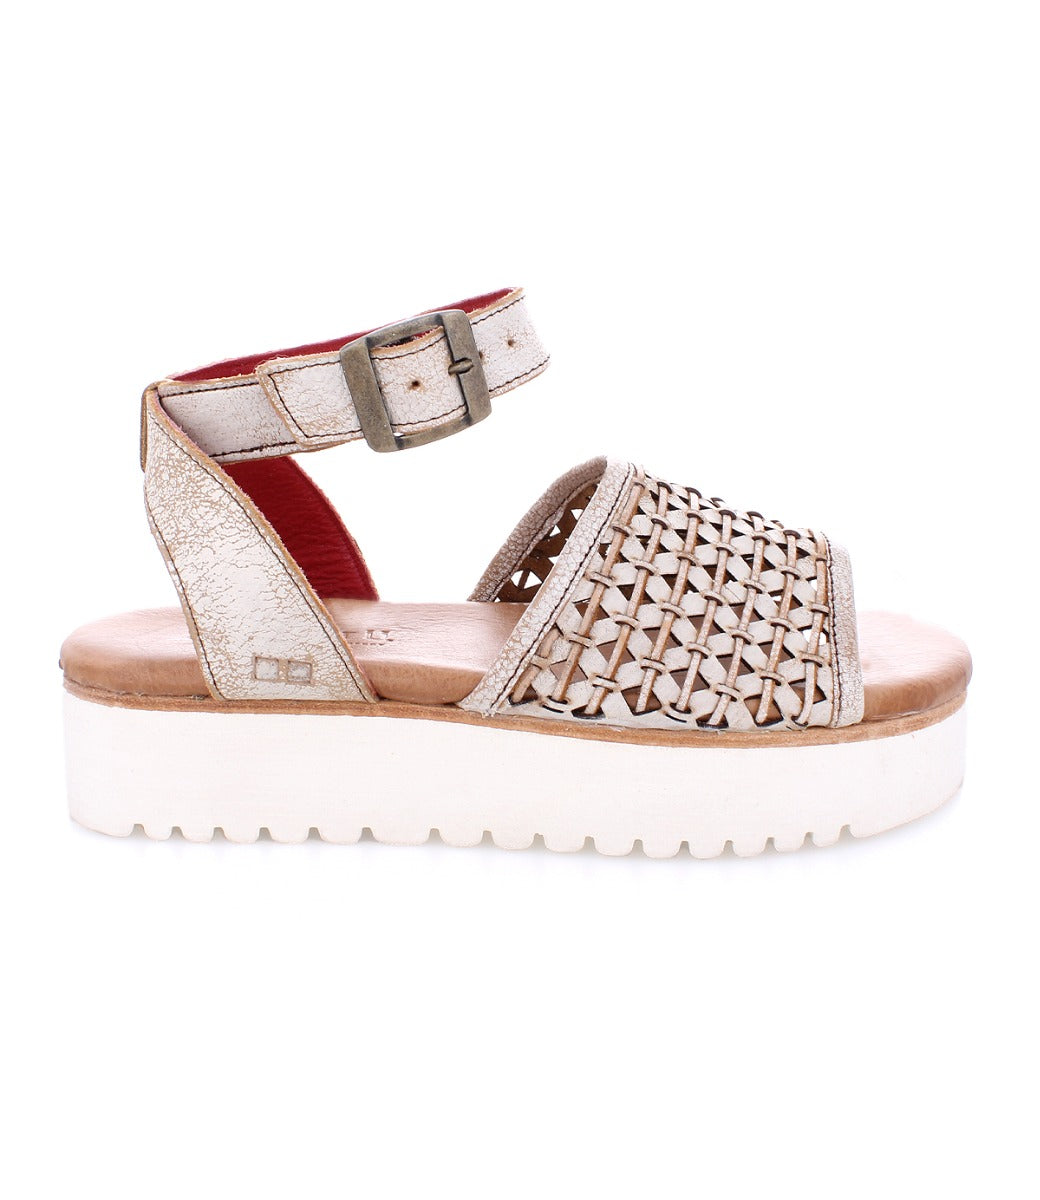 A women's Brisa platform sandal in gold with a white sole from the Bed Stu brand.